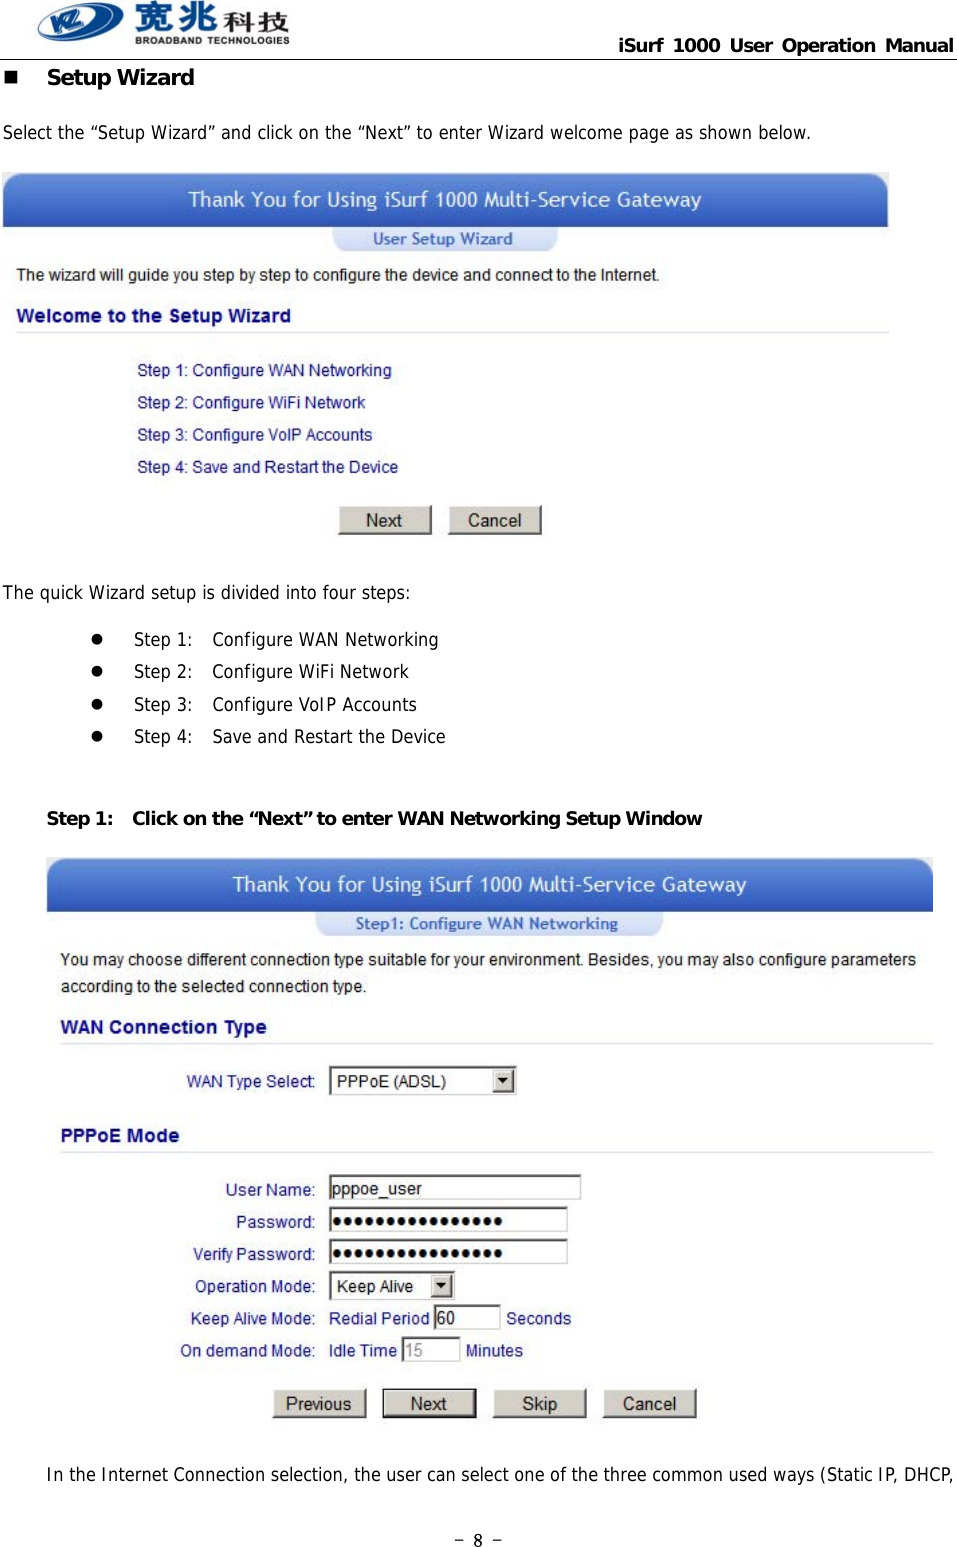                                   iSurf 1000 User Operation Manual - 8 -  Setup Wizard Select the “Setup Wizard” and click on the “Next” to enter Wizard welcome page as shown below.    The quick Wizard setup is divided into four steps:   Step 1:  Configure WAN Networking  Step 2:  Configure WiFi Network  Step 3:  Configure VoIP Accounts  Step 4:  Save and Restart the Device  Step 1:    Click on the “Next” to enter WAN Networking Setup Window  In the Internet Connection selection, the user can select one of the three common used ways (Static IP, DHCP, 